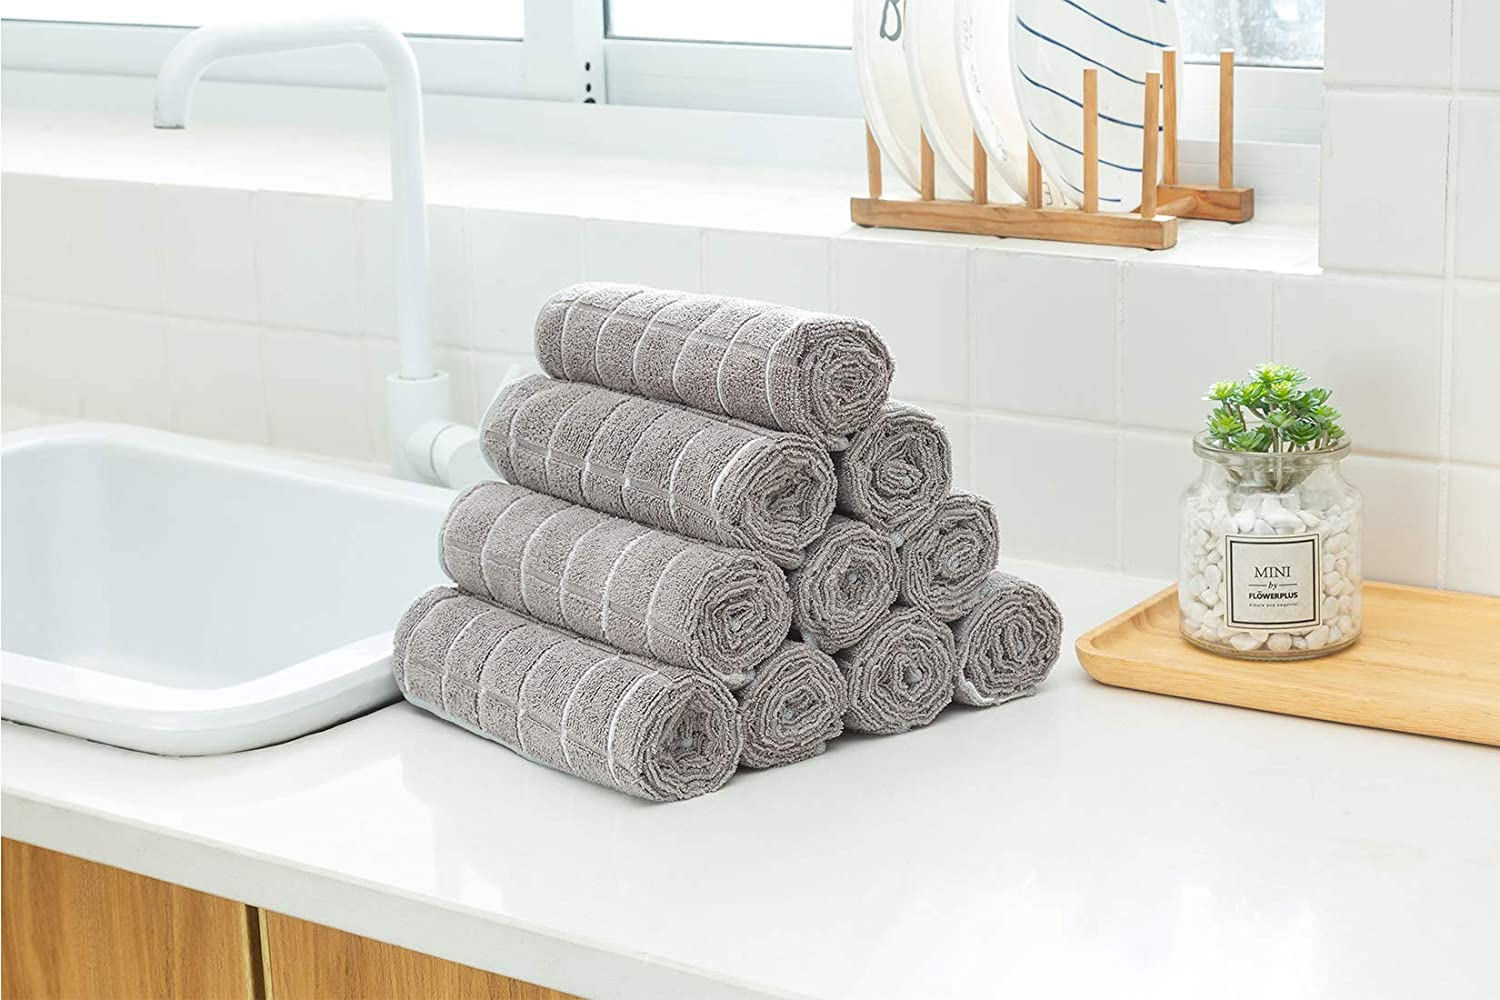 how to wash microfiber towels